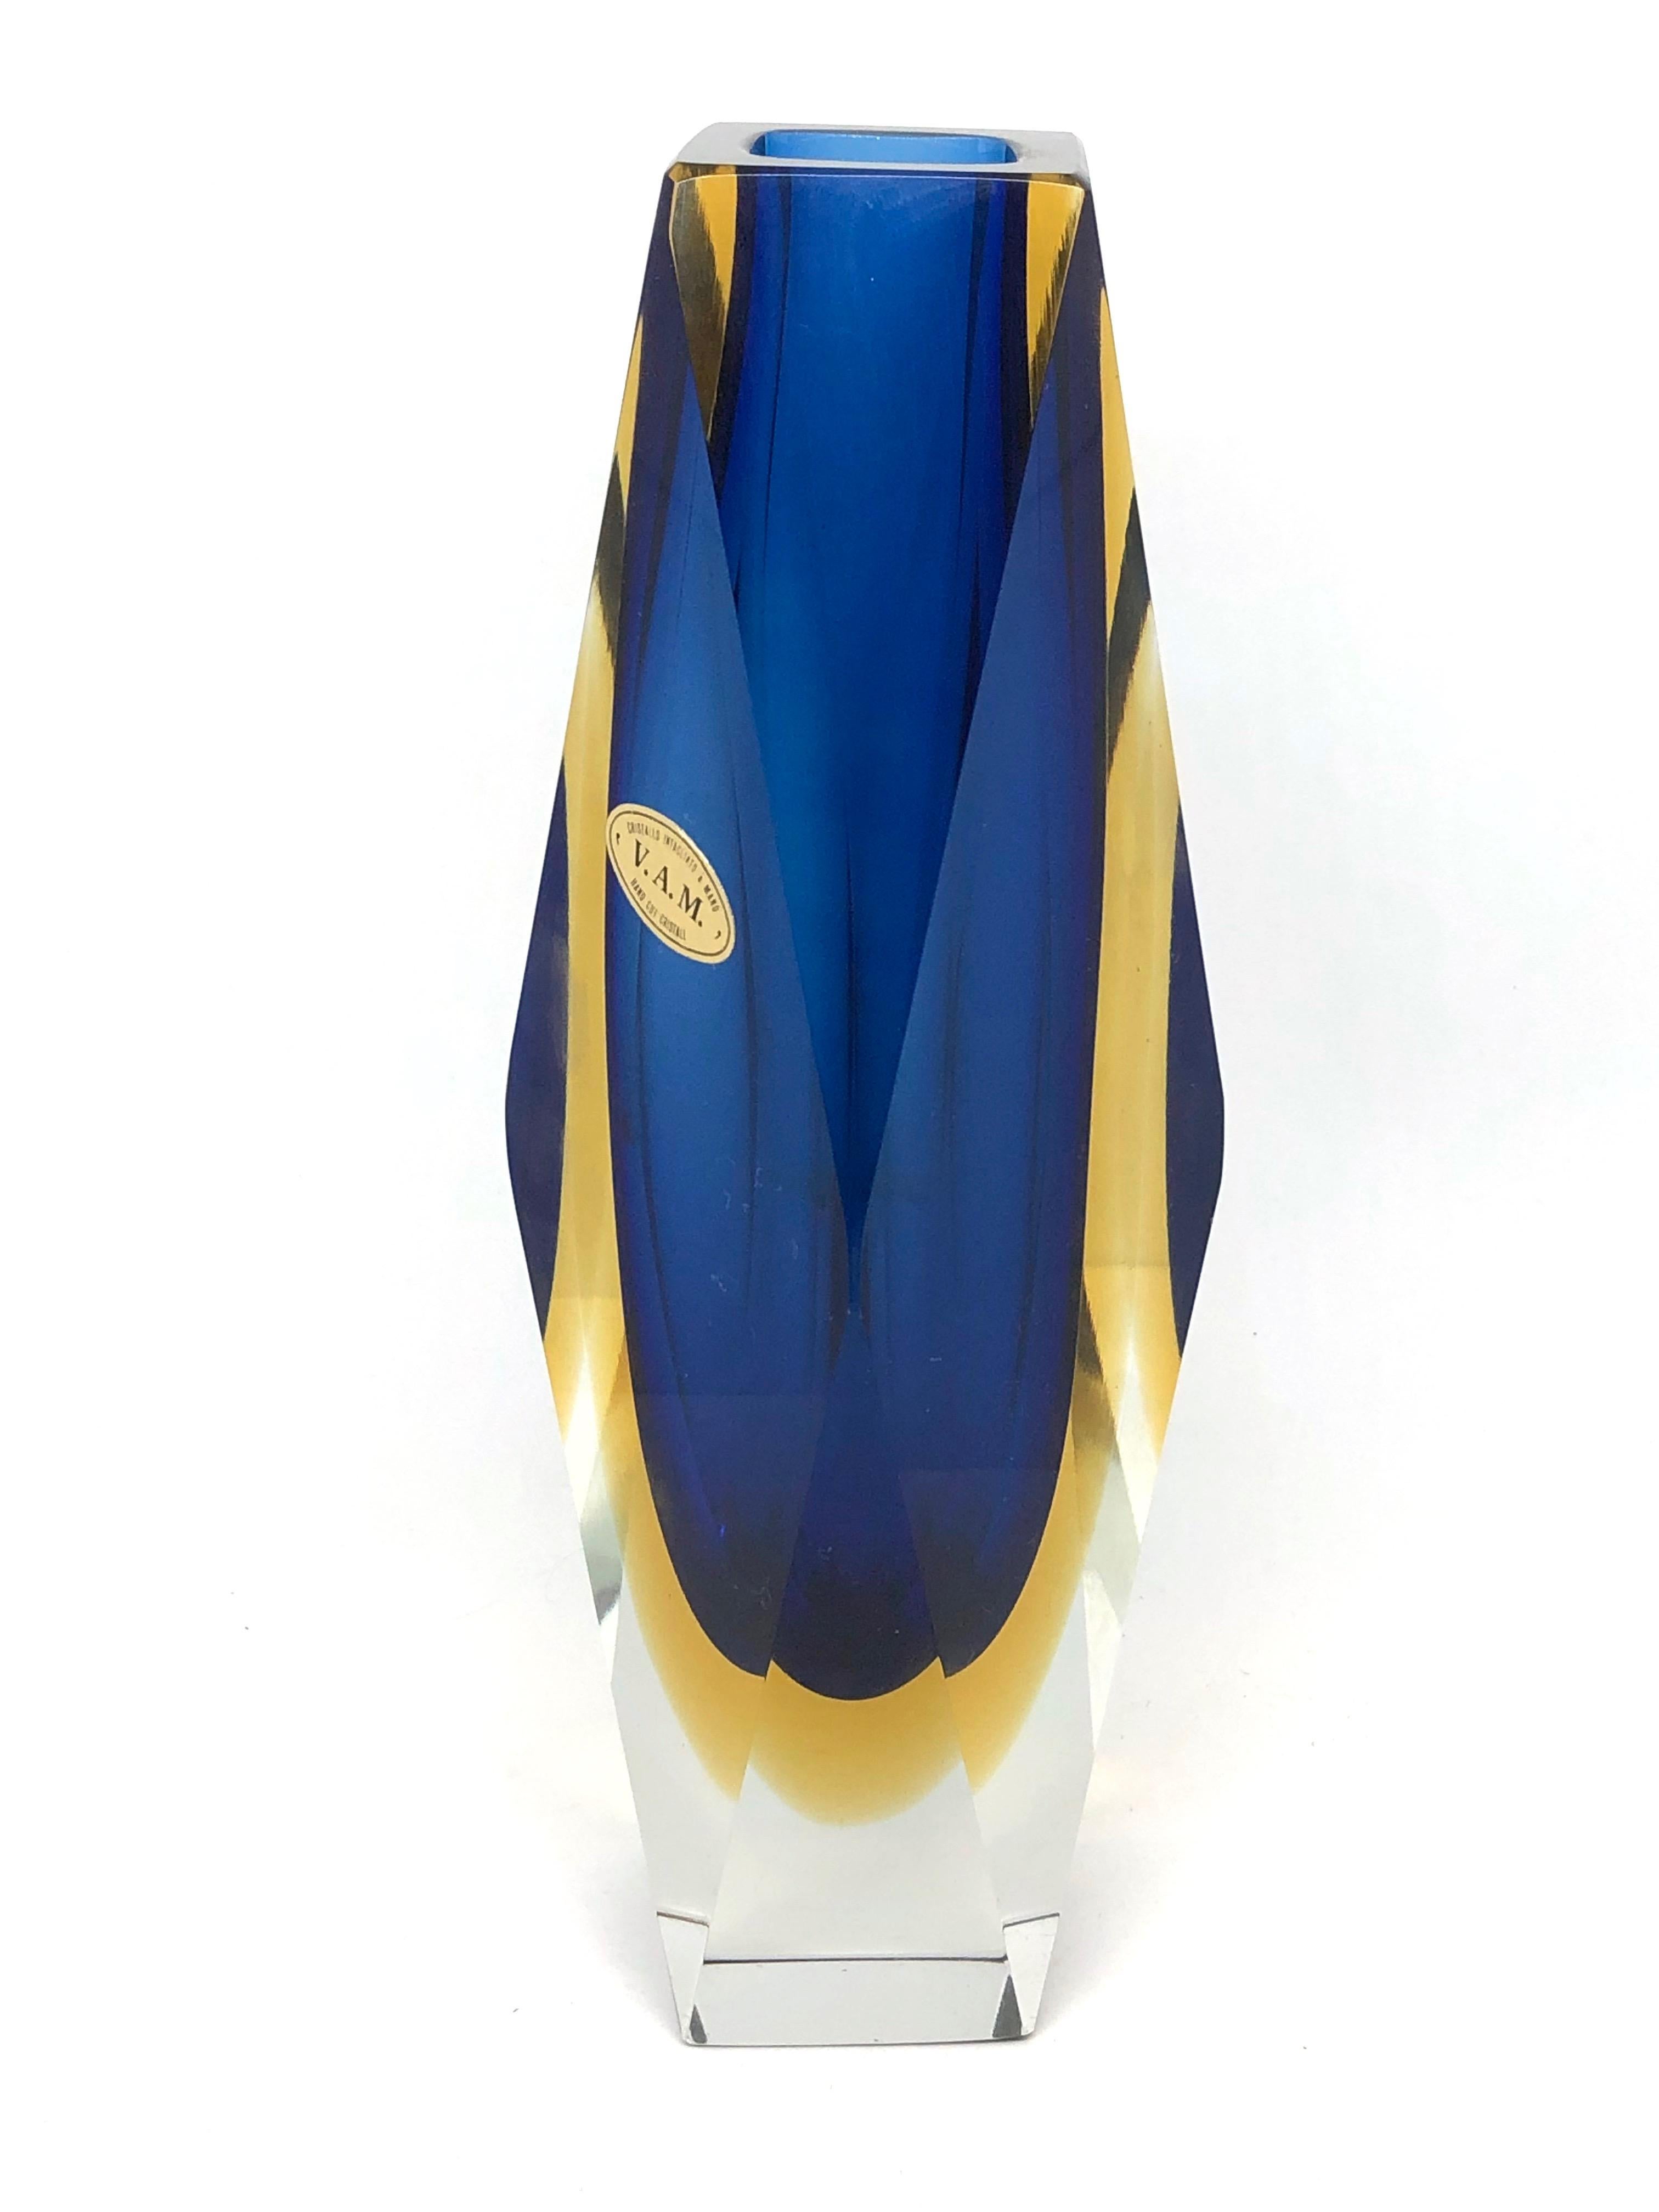 An amazing Venetian Murano glass Mid-Century Modern Mandruzzato vase made in Italy, circa 1960s. This is a heavy glass block vase. Blue on the inside followed by a layer of yellow within clear. The top of the vase is flat cut. Vase is in very good